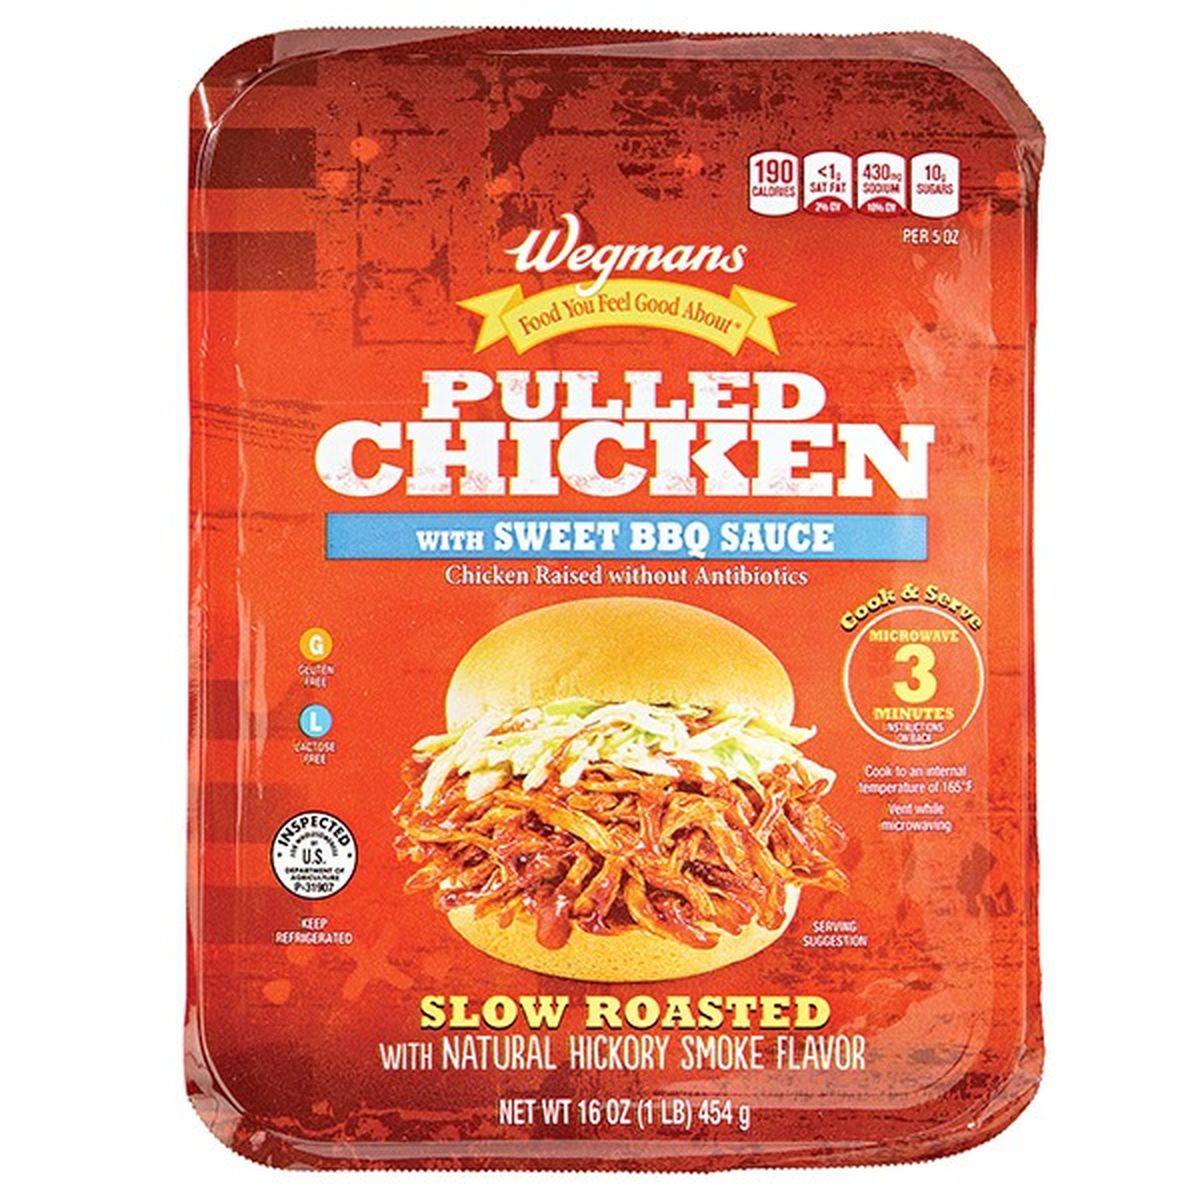 Calories in Wegmans Antibiotic Free Pulled Chicken with Sweet BBQ Sauce